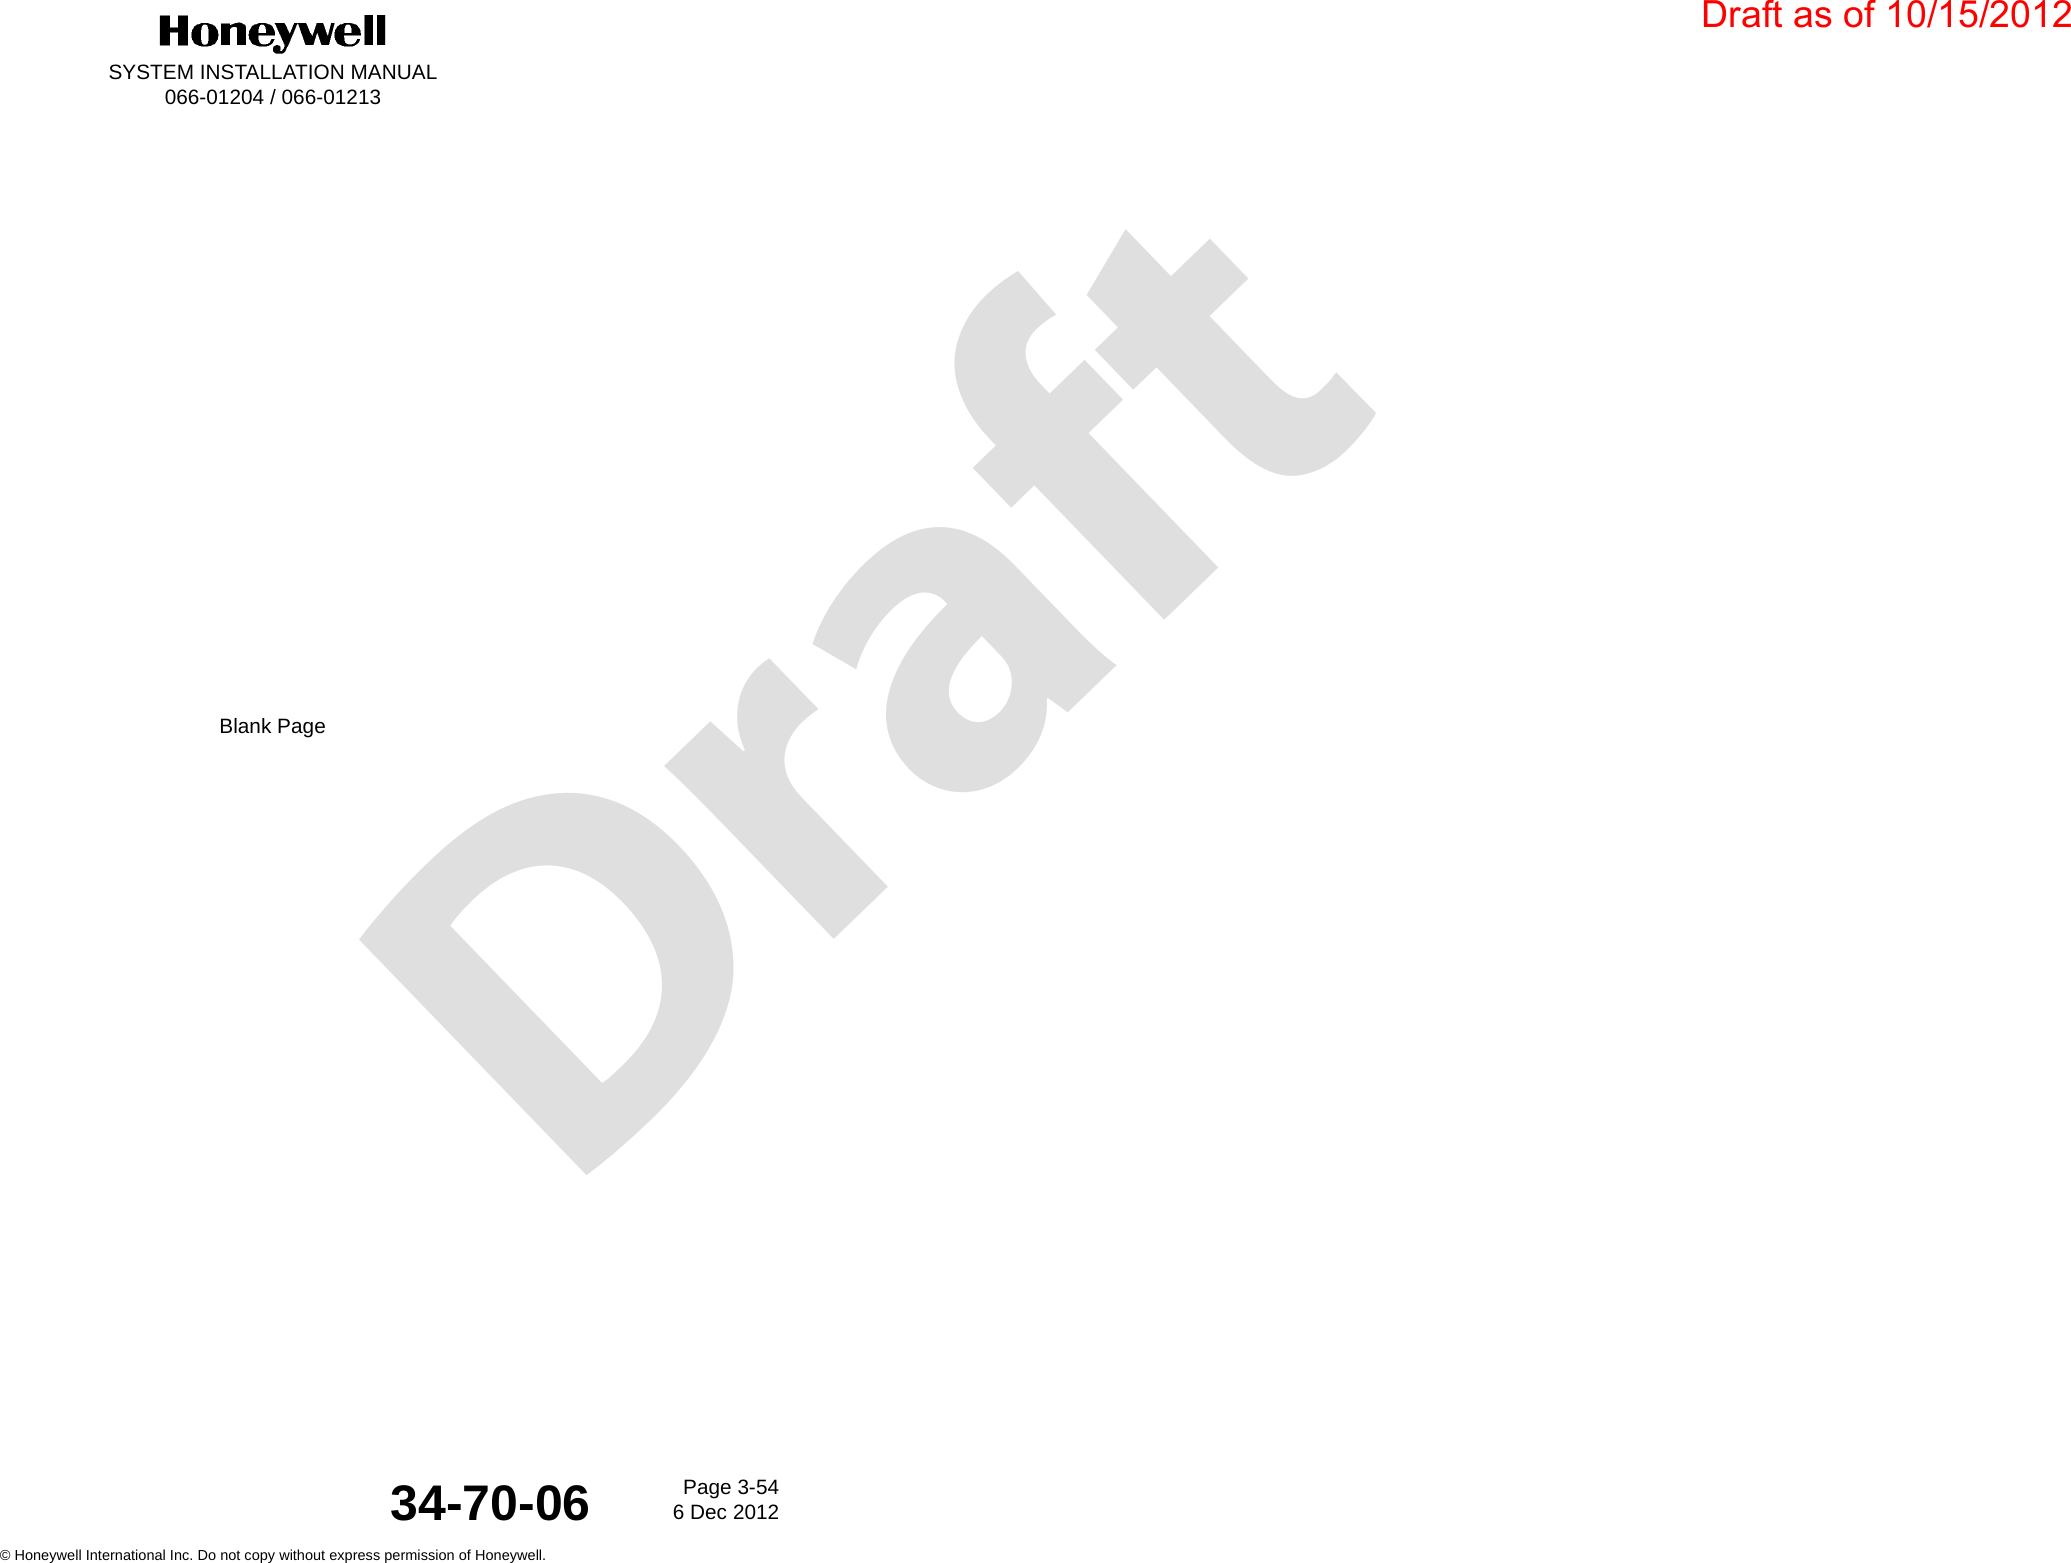 DraftSYSTEM INSTALLATION MANUAL066-01204 / 066-01213Page 3-546 Dec 2012© Honeywell International Inc. Do not copy without express permission of Honeywell.34-70-06Blank PageDraft as of 10/15/2012